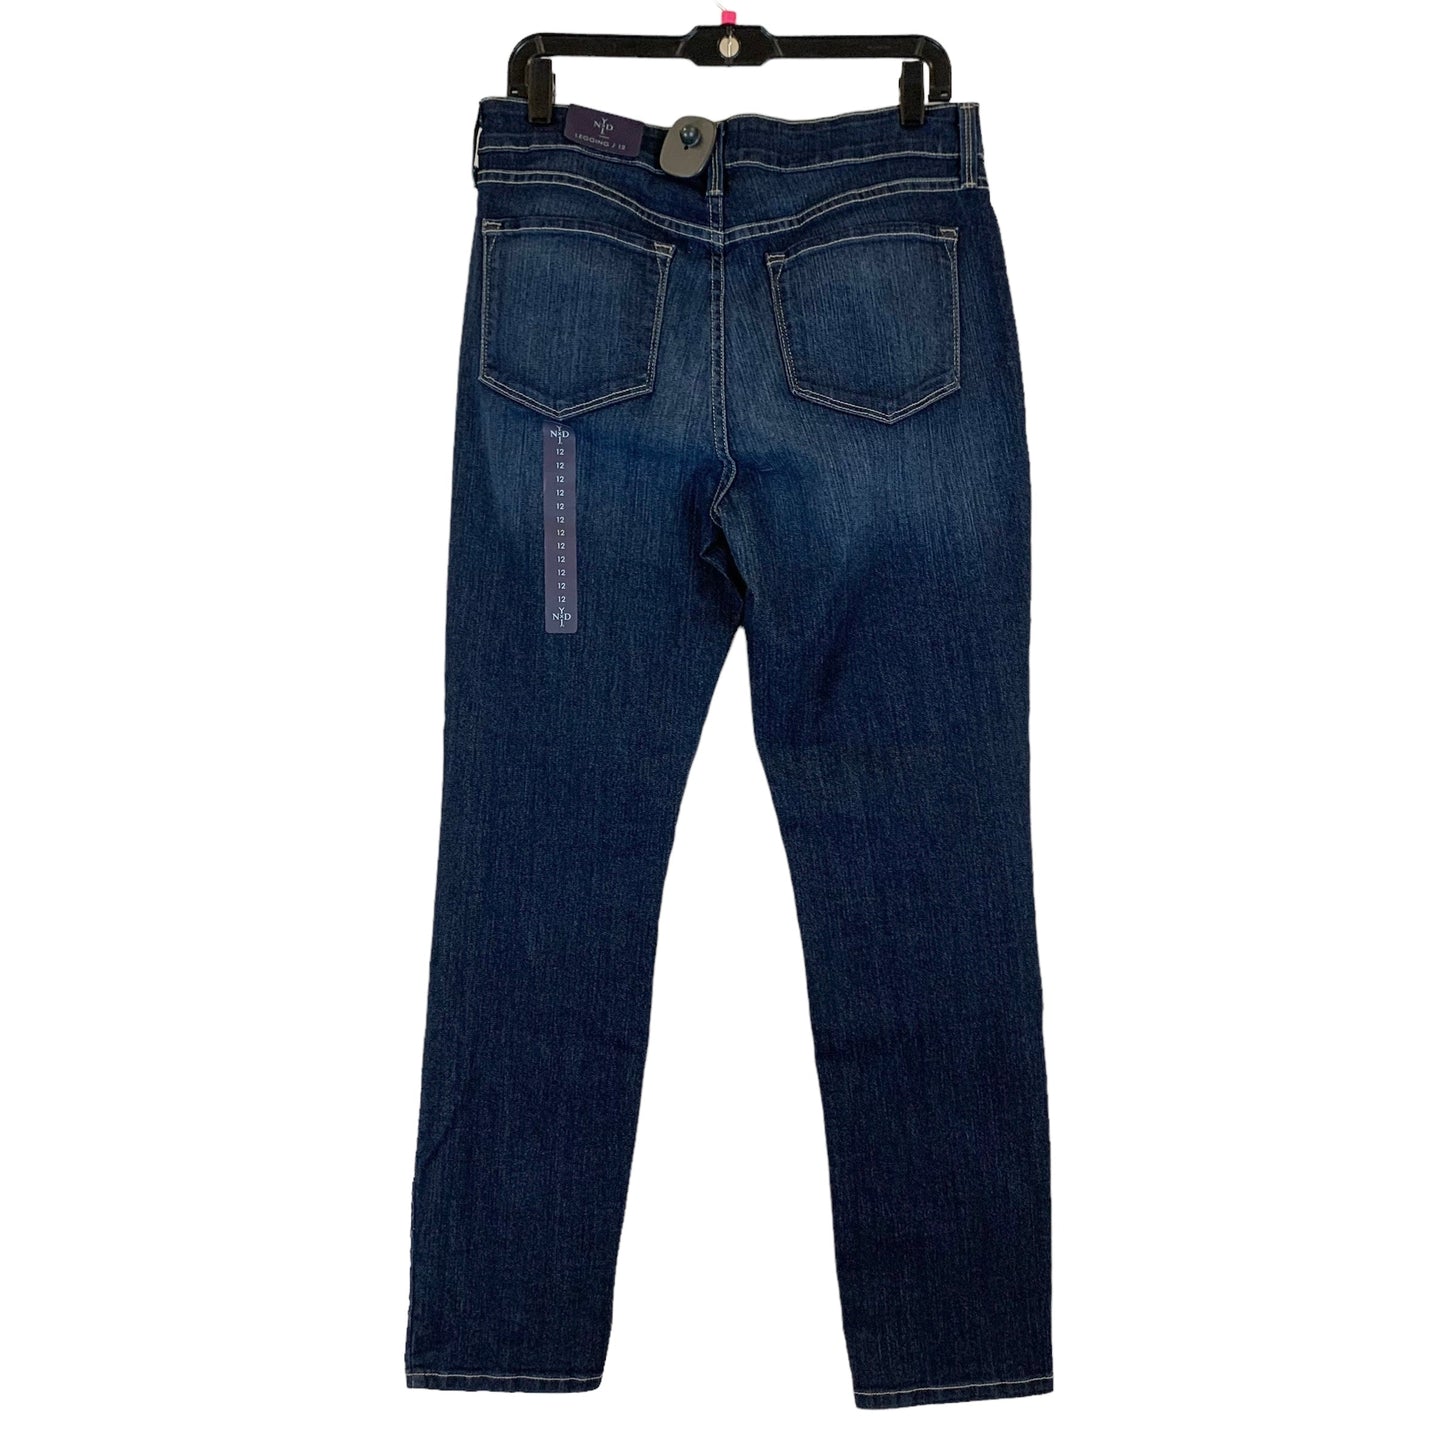 Blue Denim Jeans Skinny Not Your Daughters Jeans, Size 12